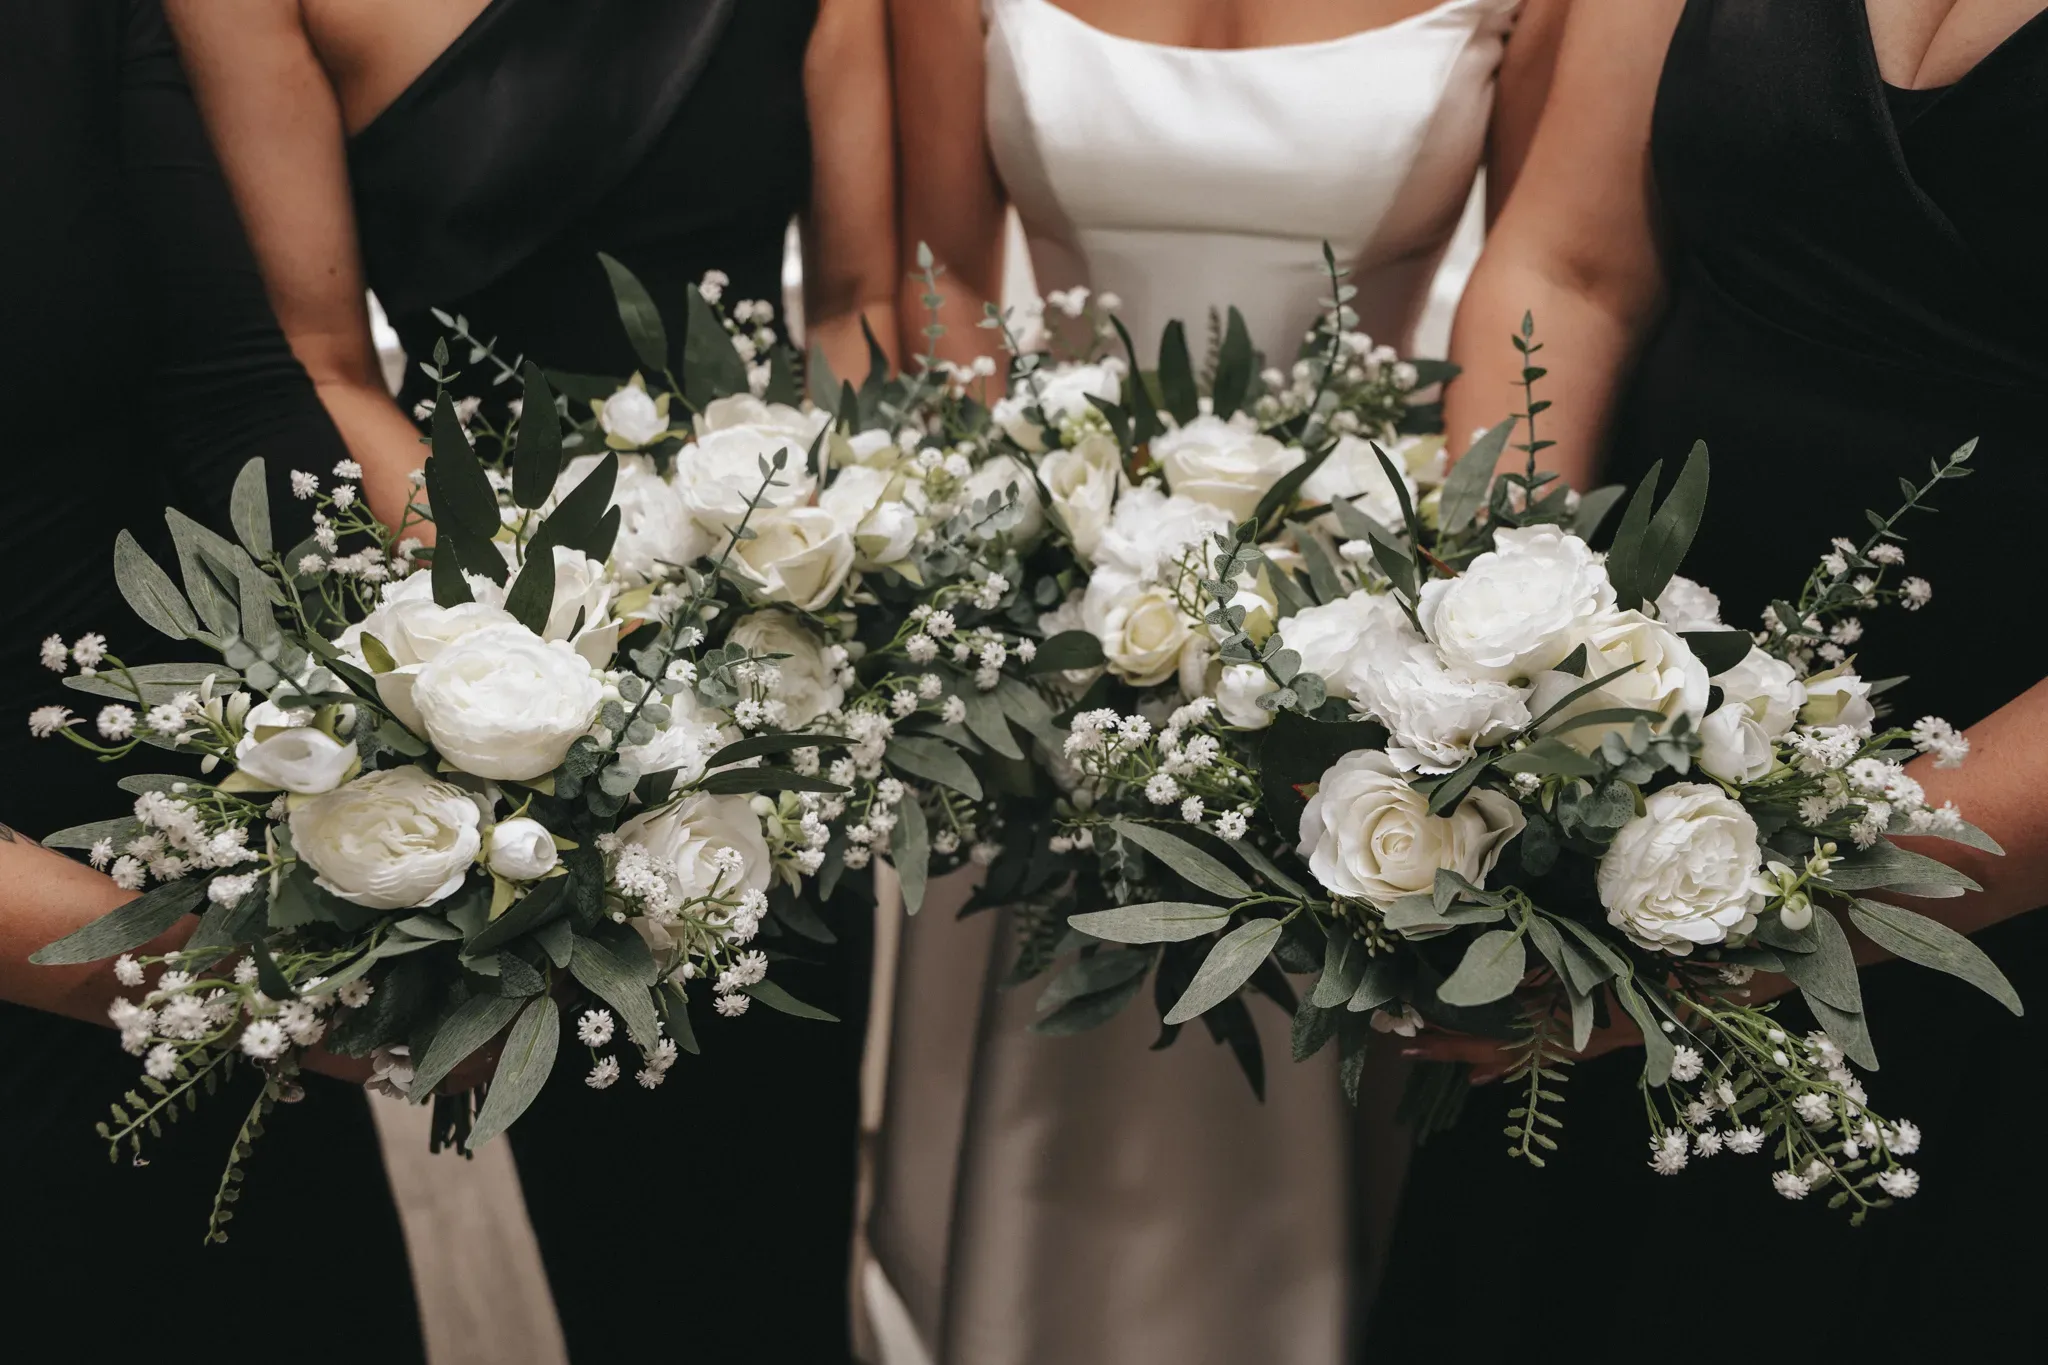 Three women in elegant white and black dresses holding large bouquets with white roses and lush greenery close to the camera, focusing on the flowers.